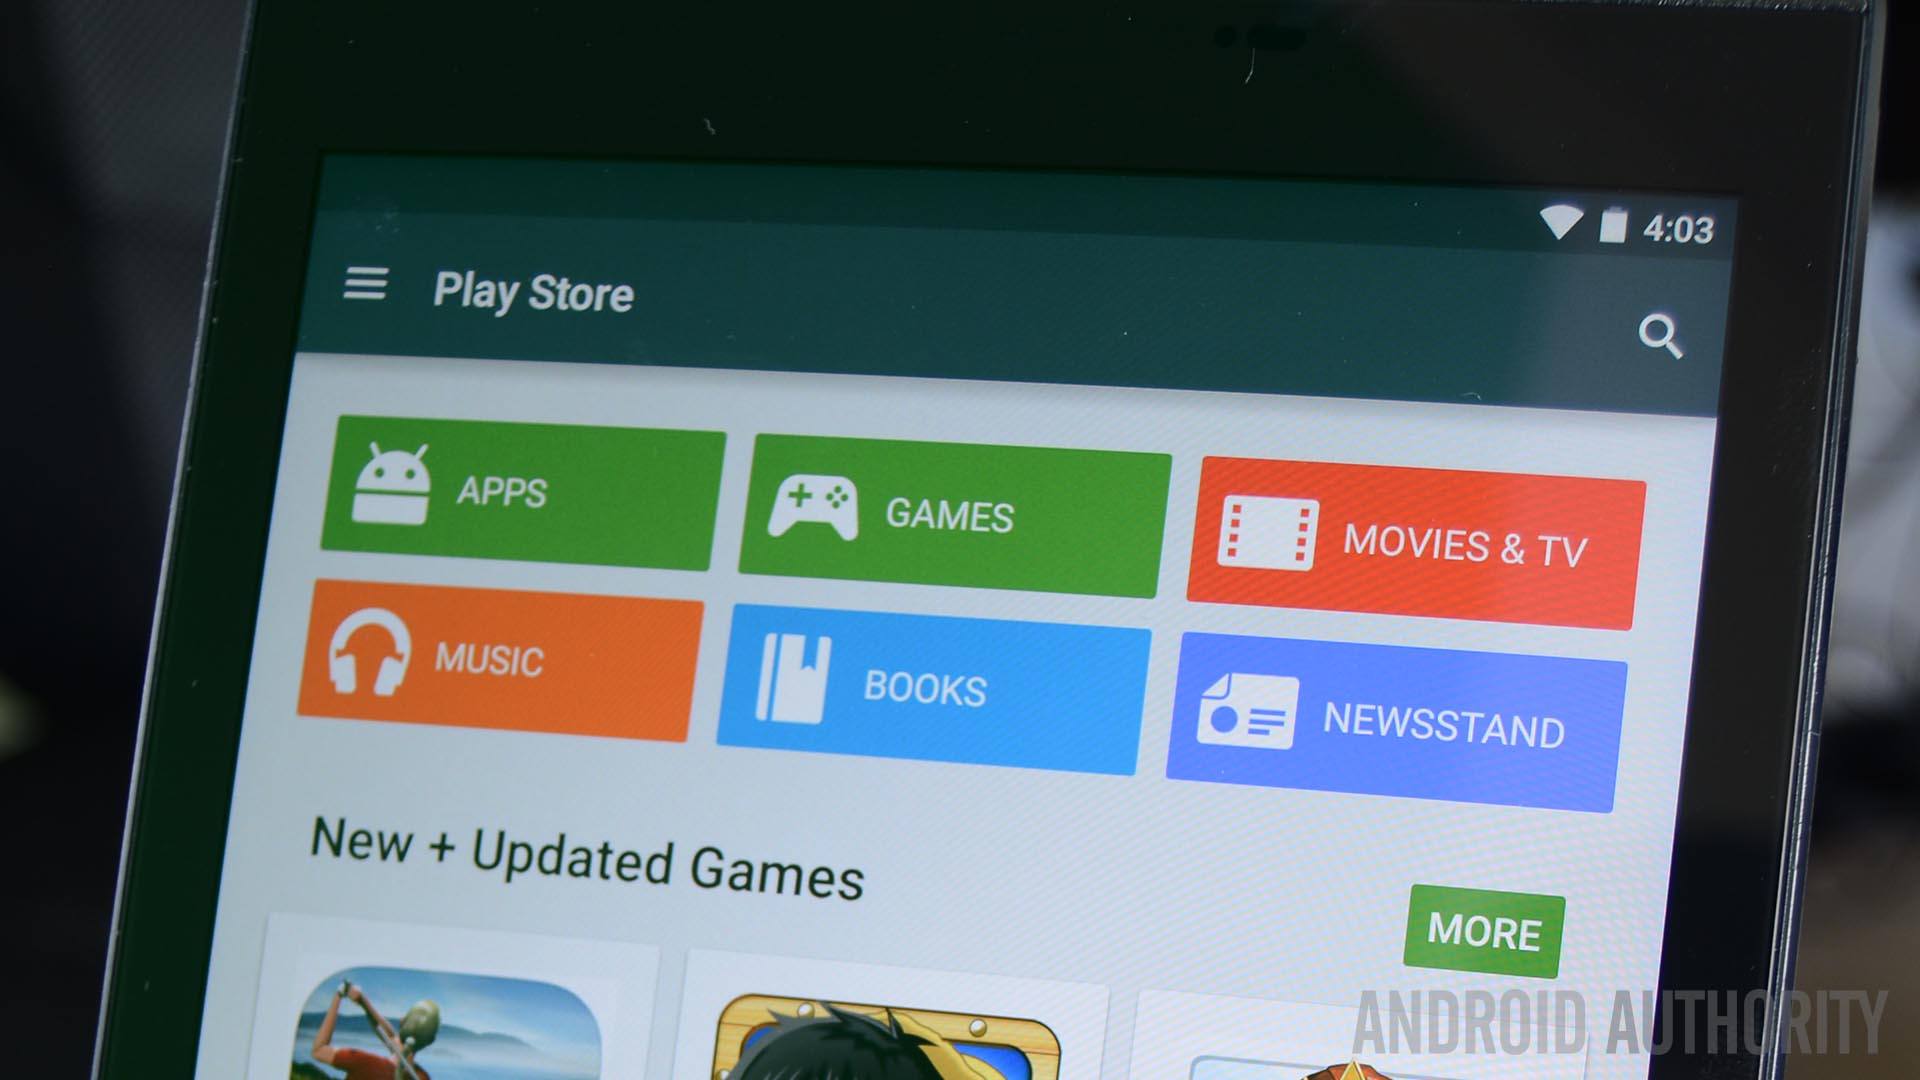 Things The Google Play Store Could Improve Part 1 The Top Charts